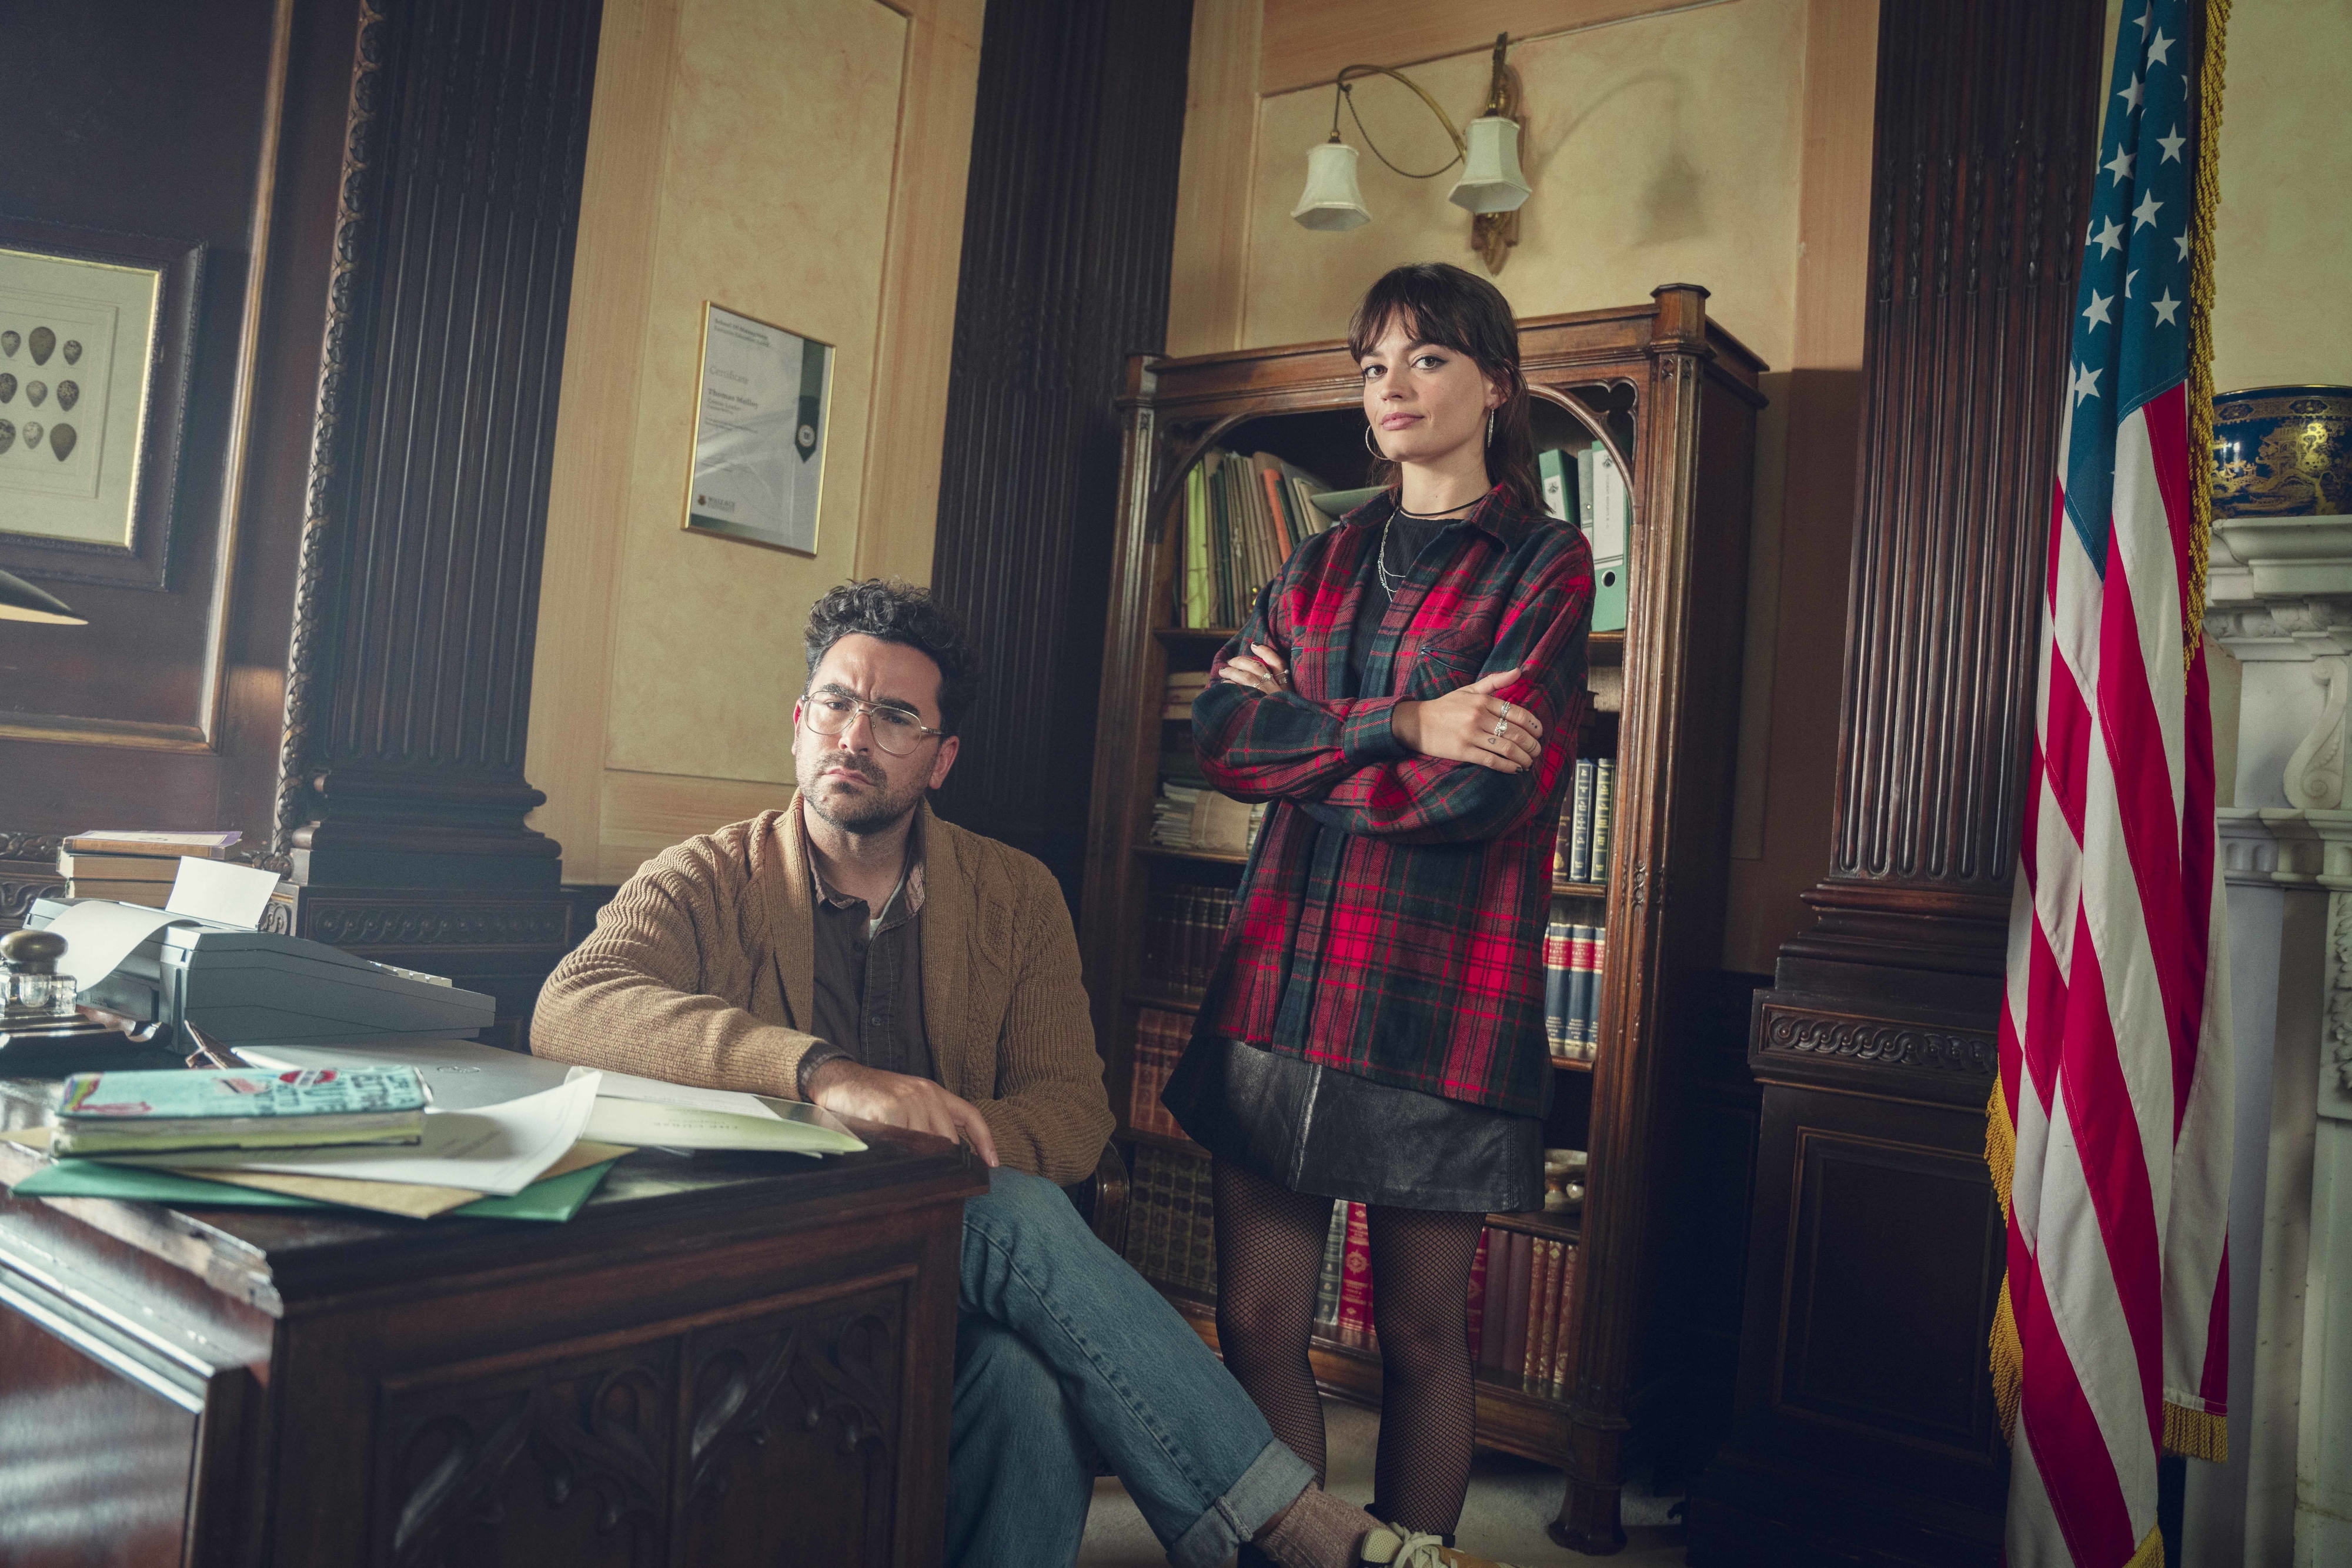 Dan sits at a desk, while Emma stands at his side with her arms folded